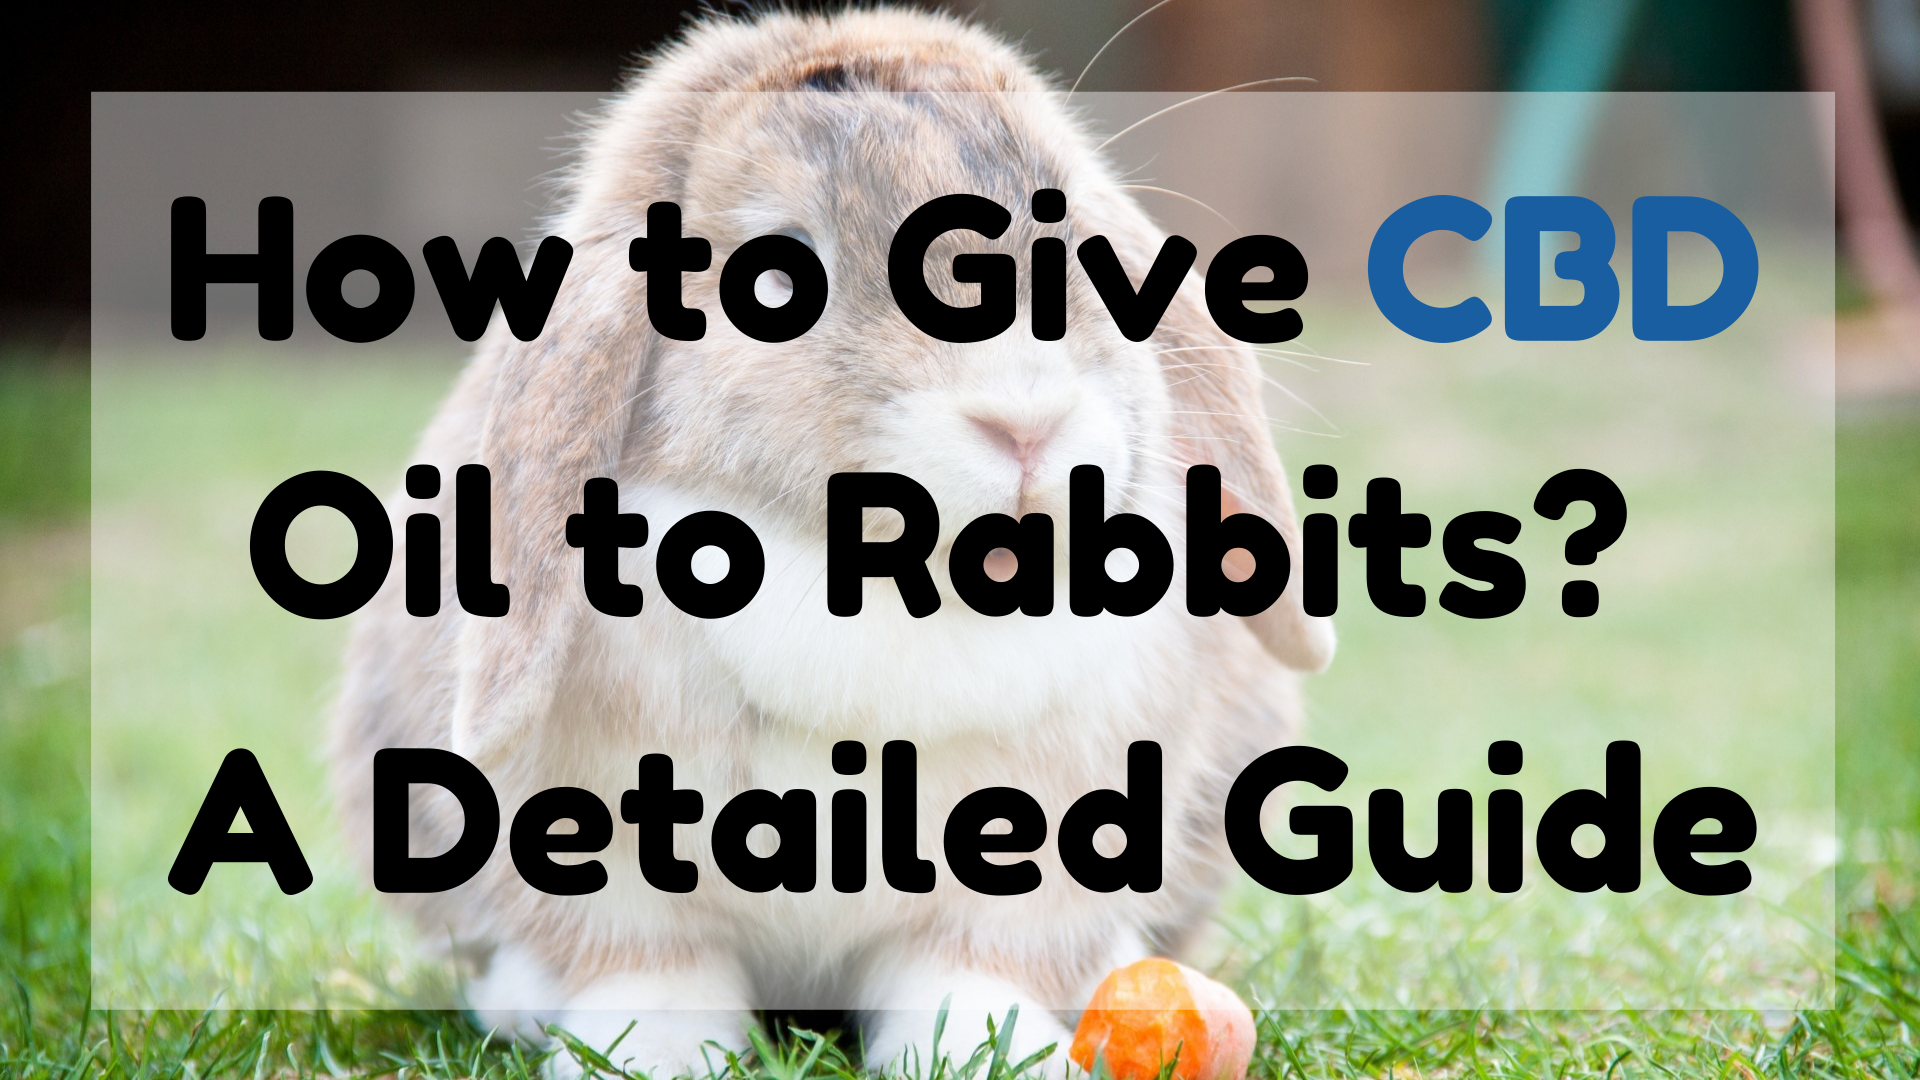 How to Give CBD Oil to Rabbits